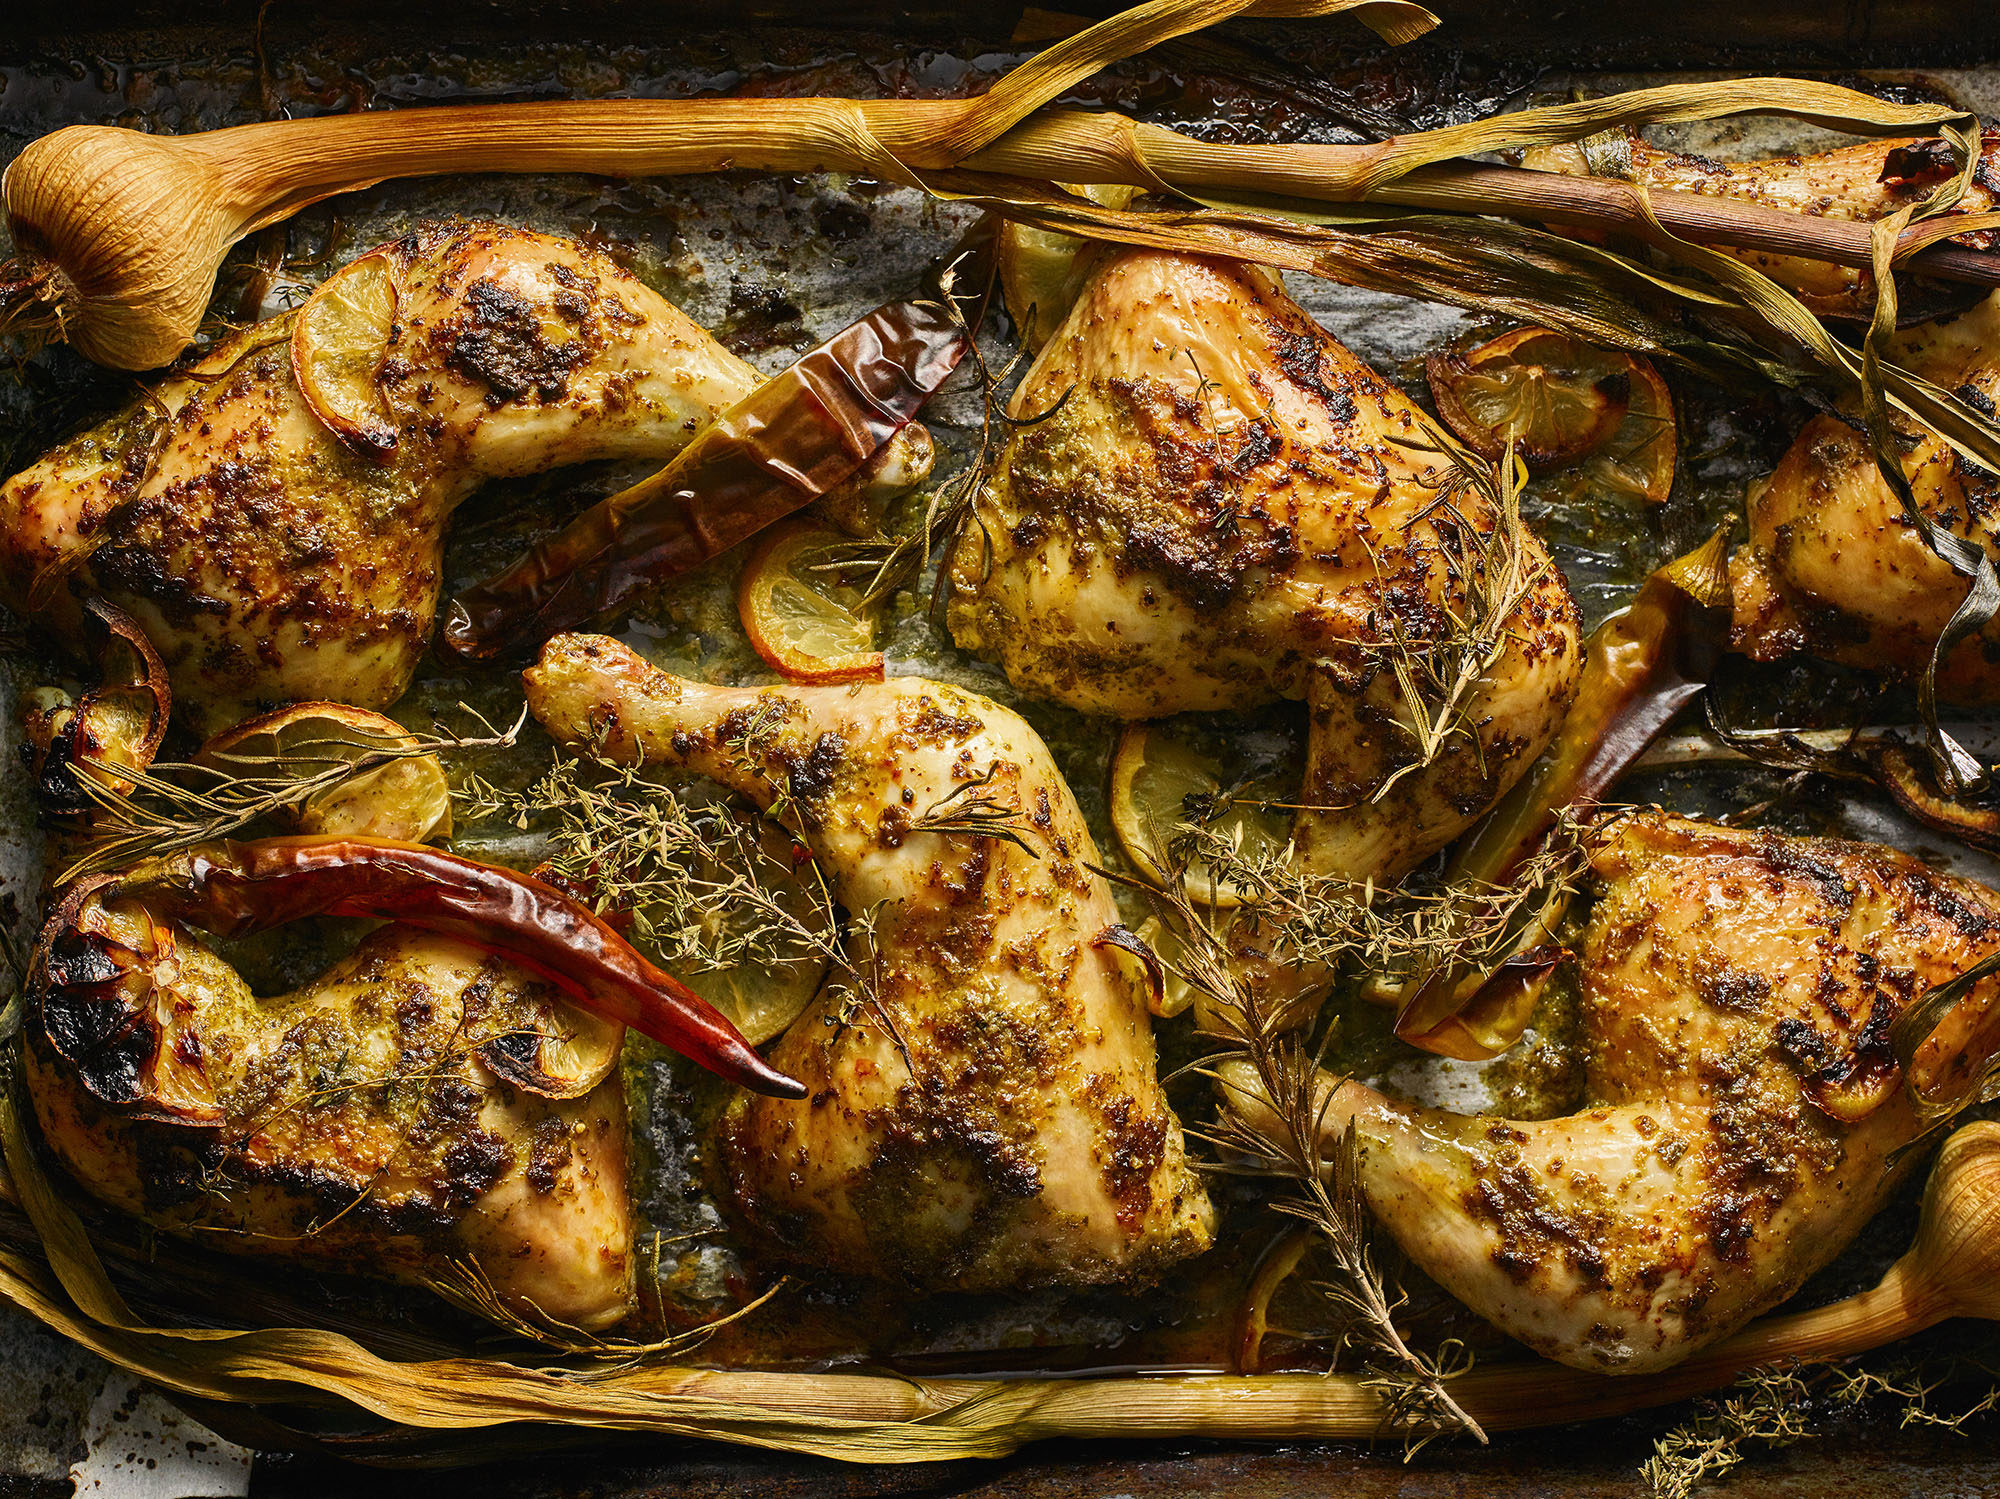 Roast chicken legs with chili peppers and herbs on a baking tray